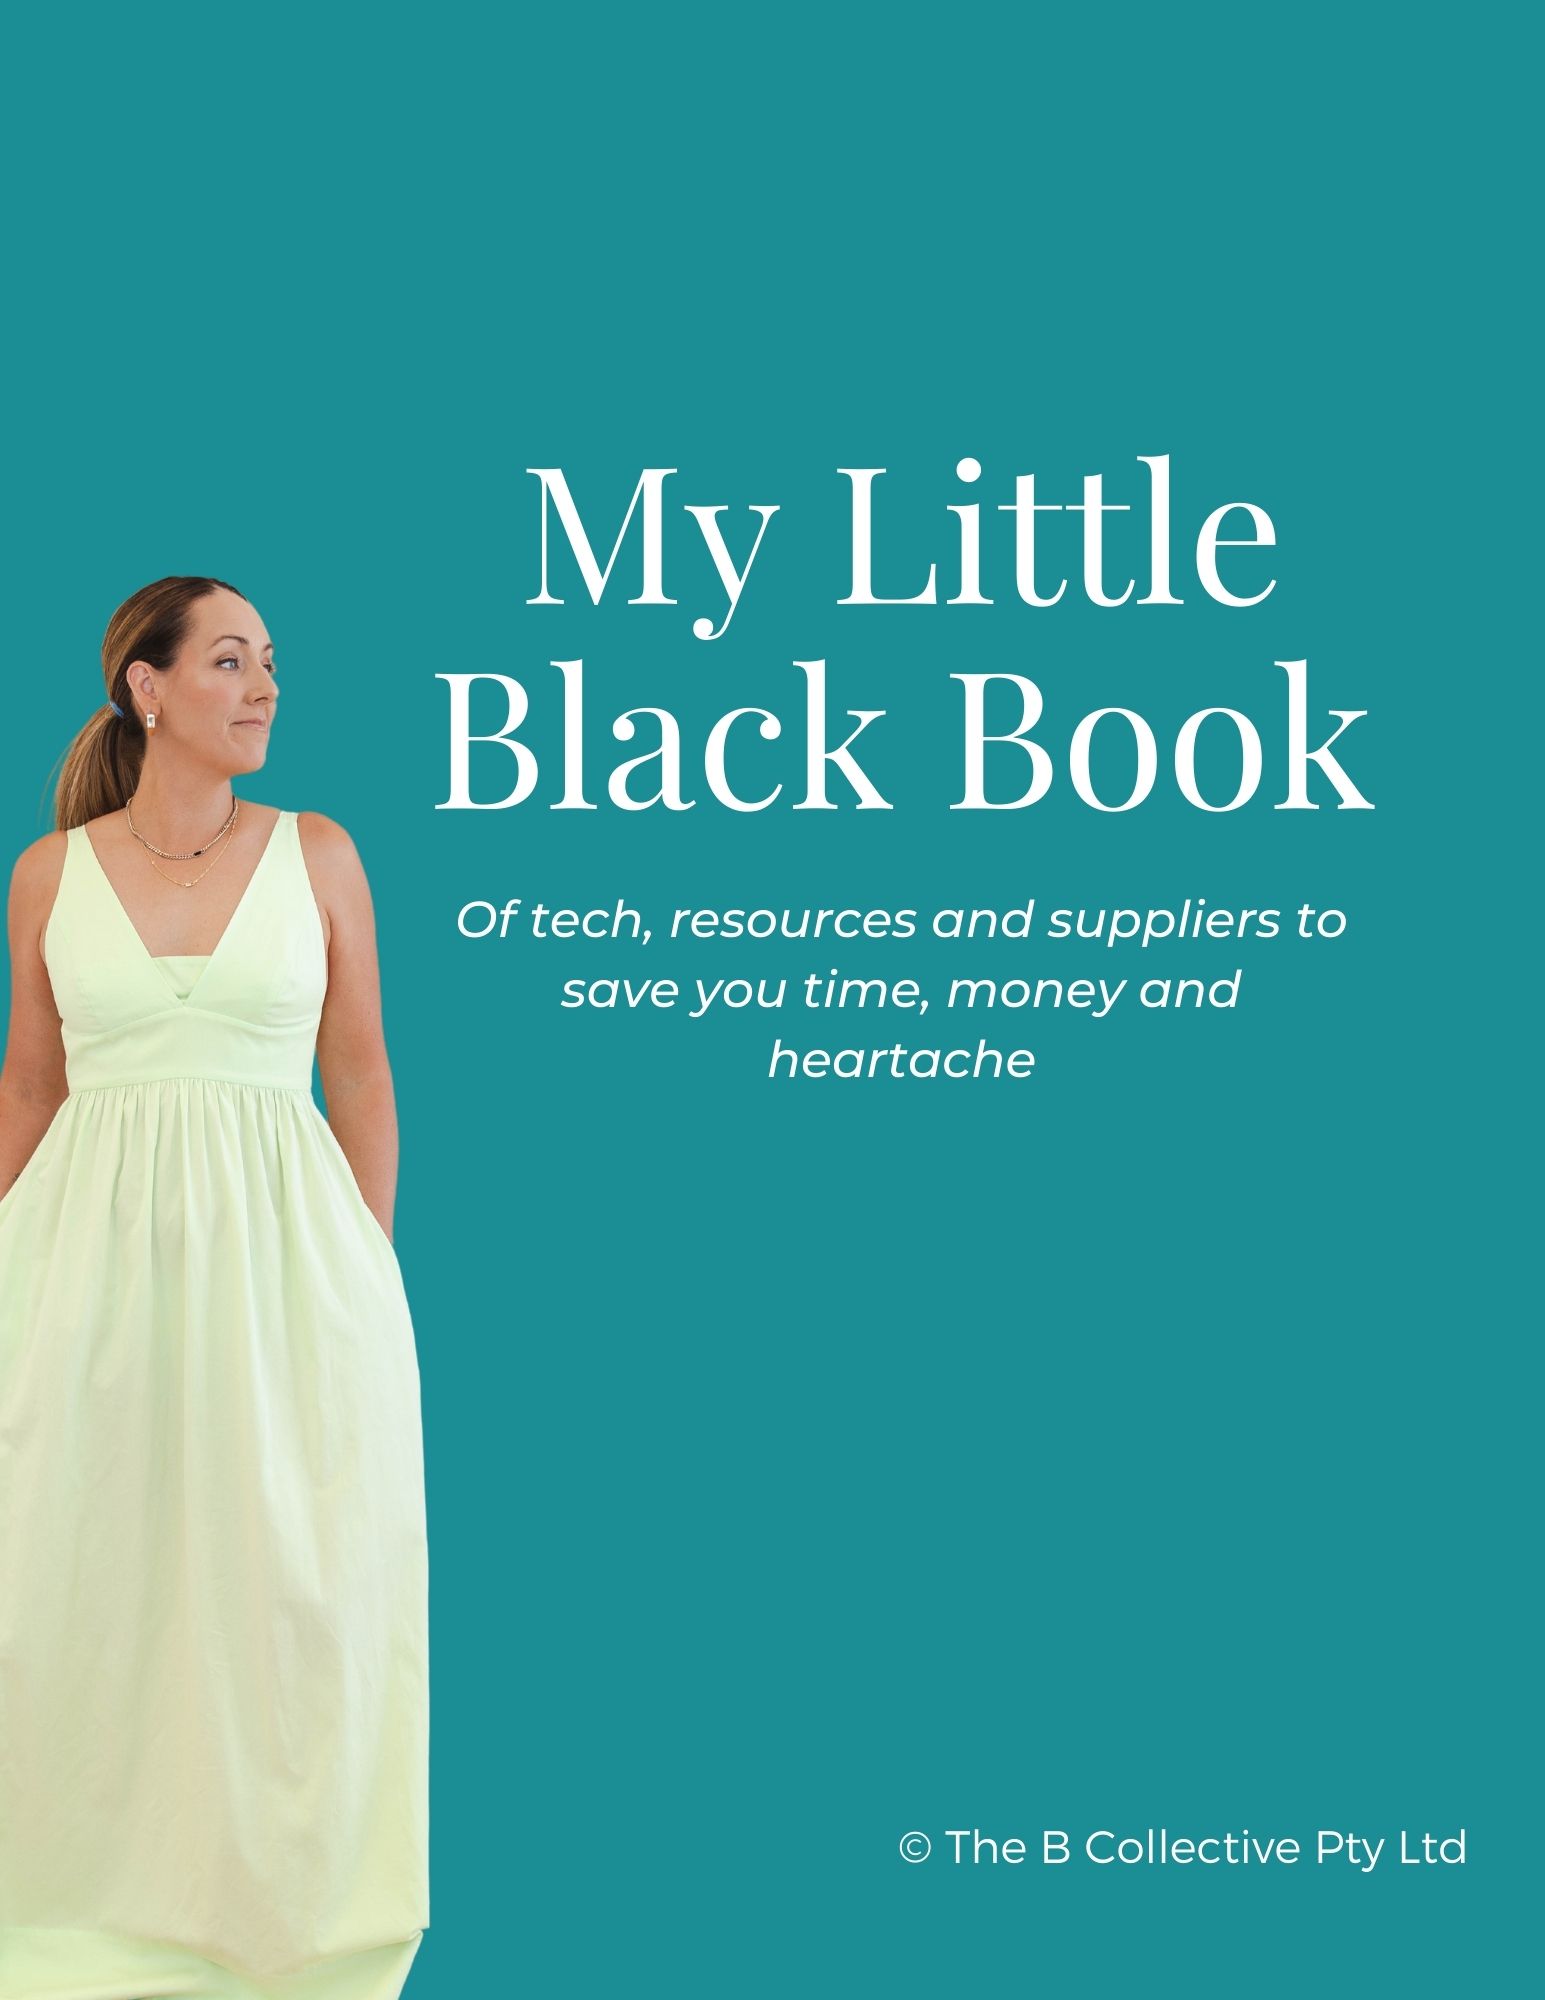 My Little Black Book Of tech, resources and suppliers to save you time, money and heartache Robyn Birkin